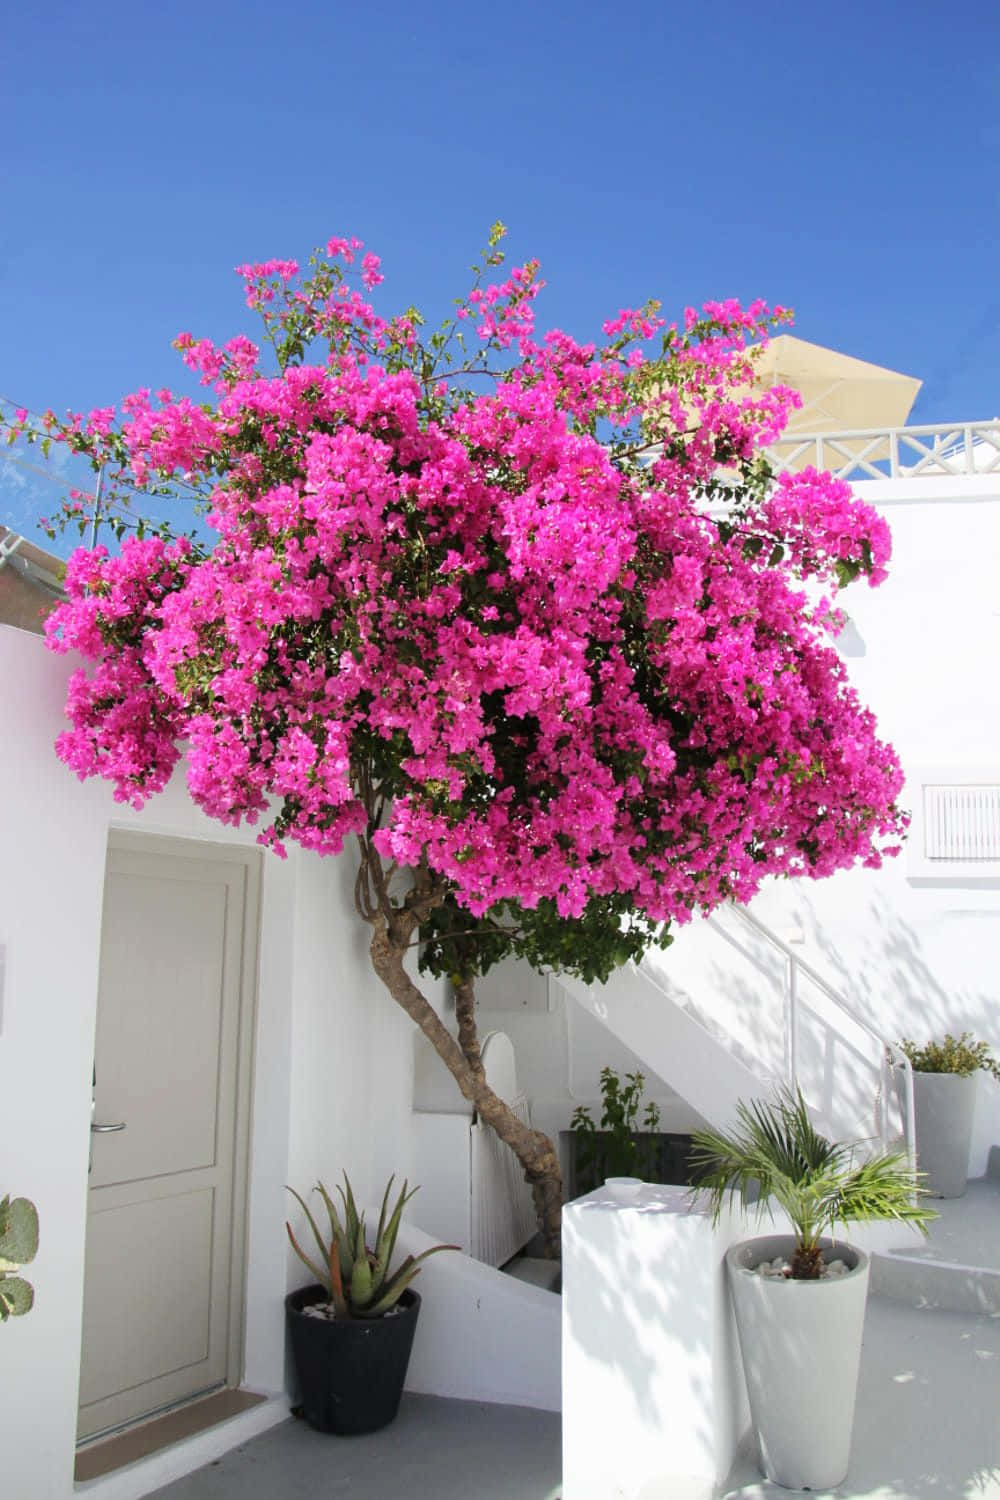 A Pink Bougainvillea Tree In Front Of A White House